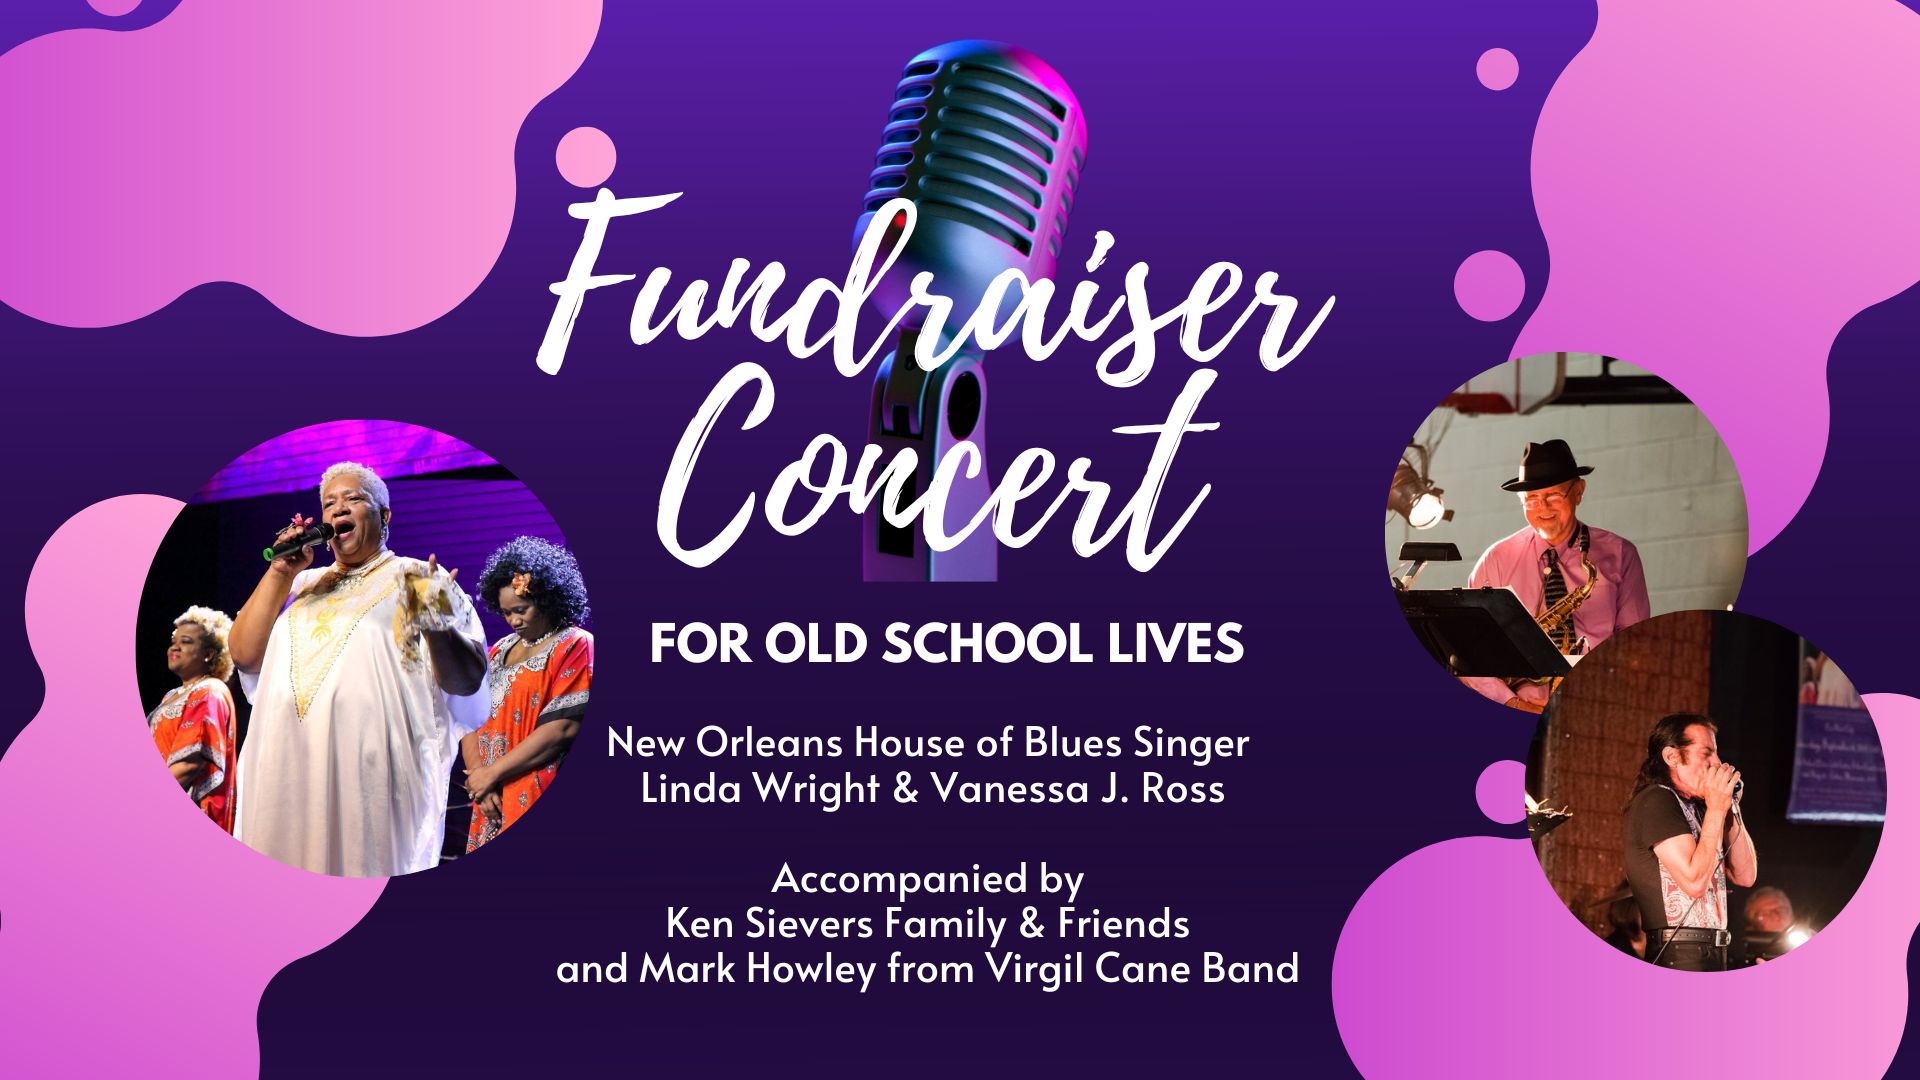 Fundraiser Concert with Linda Wright, Cotton, Minnesota, United States